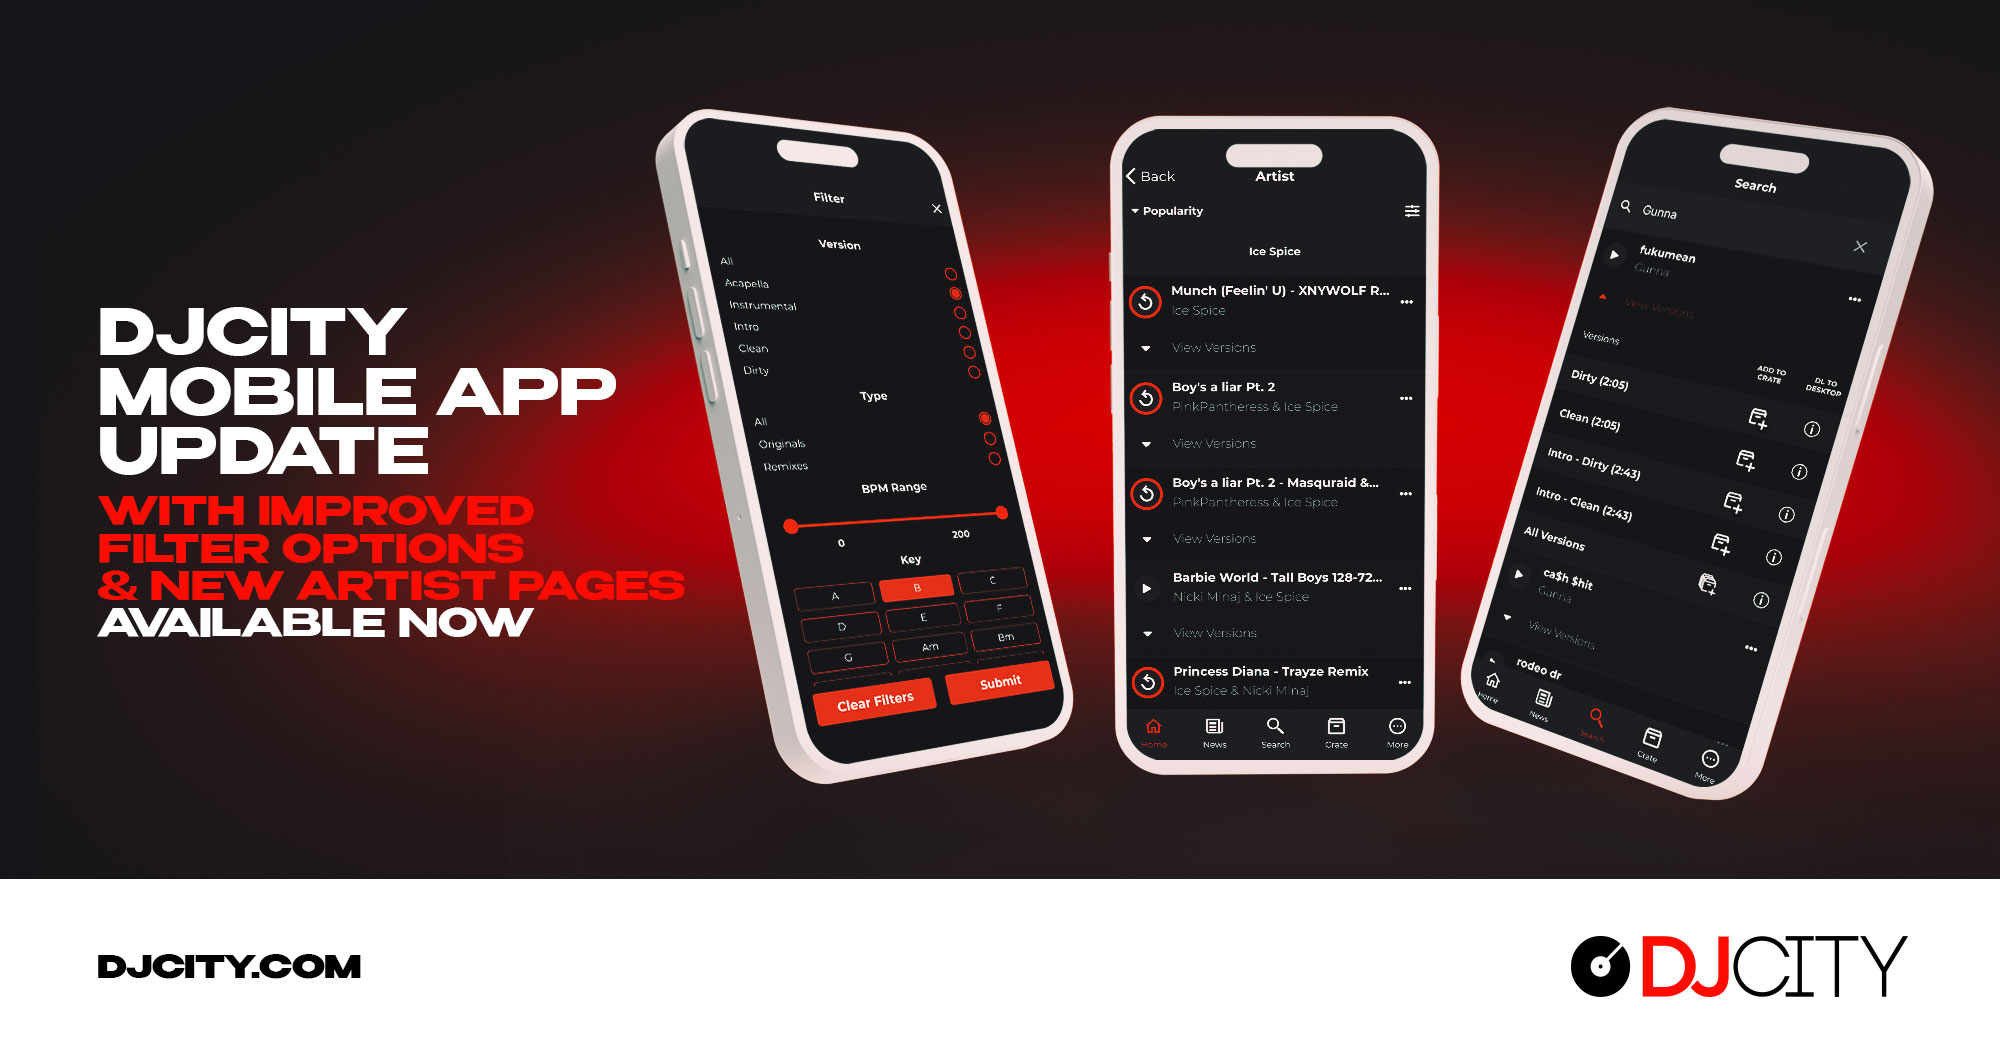 DJcity Mobile App Update With Improved Filter Options and New Artist Pages Available Now